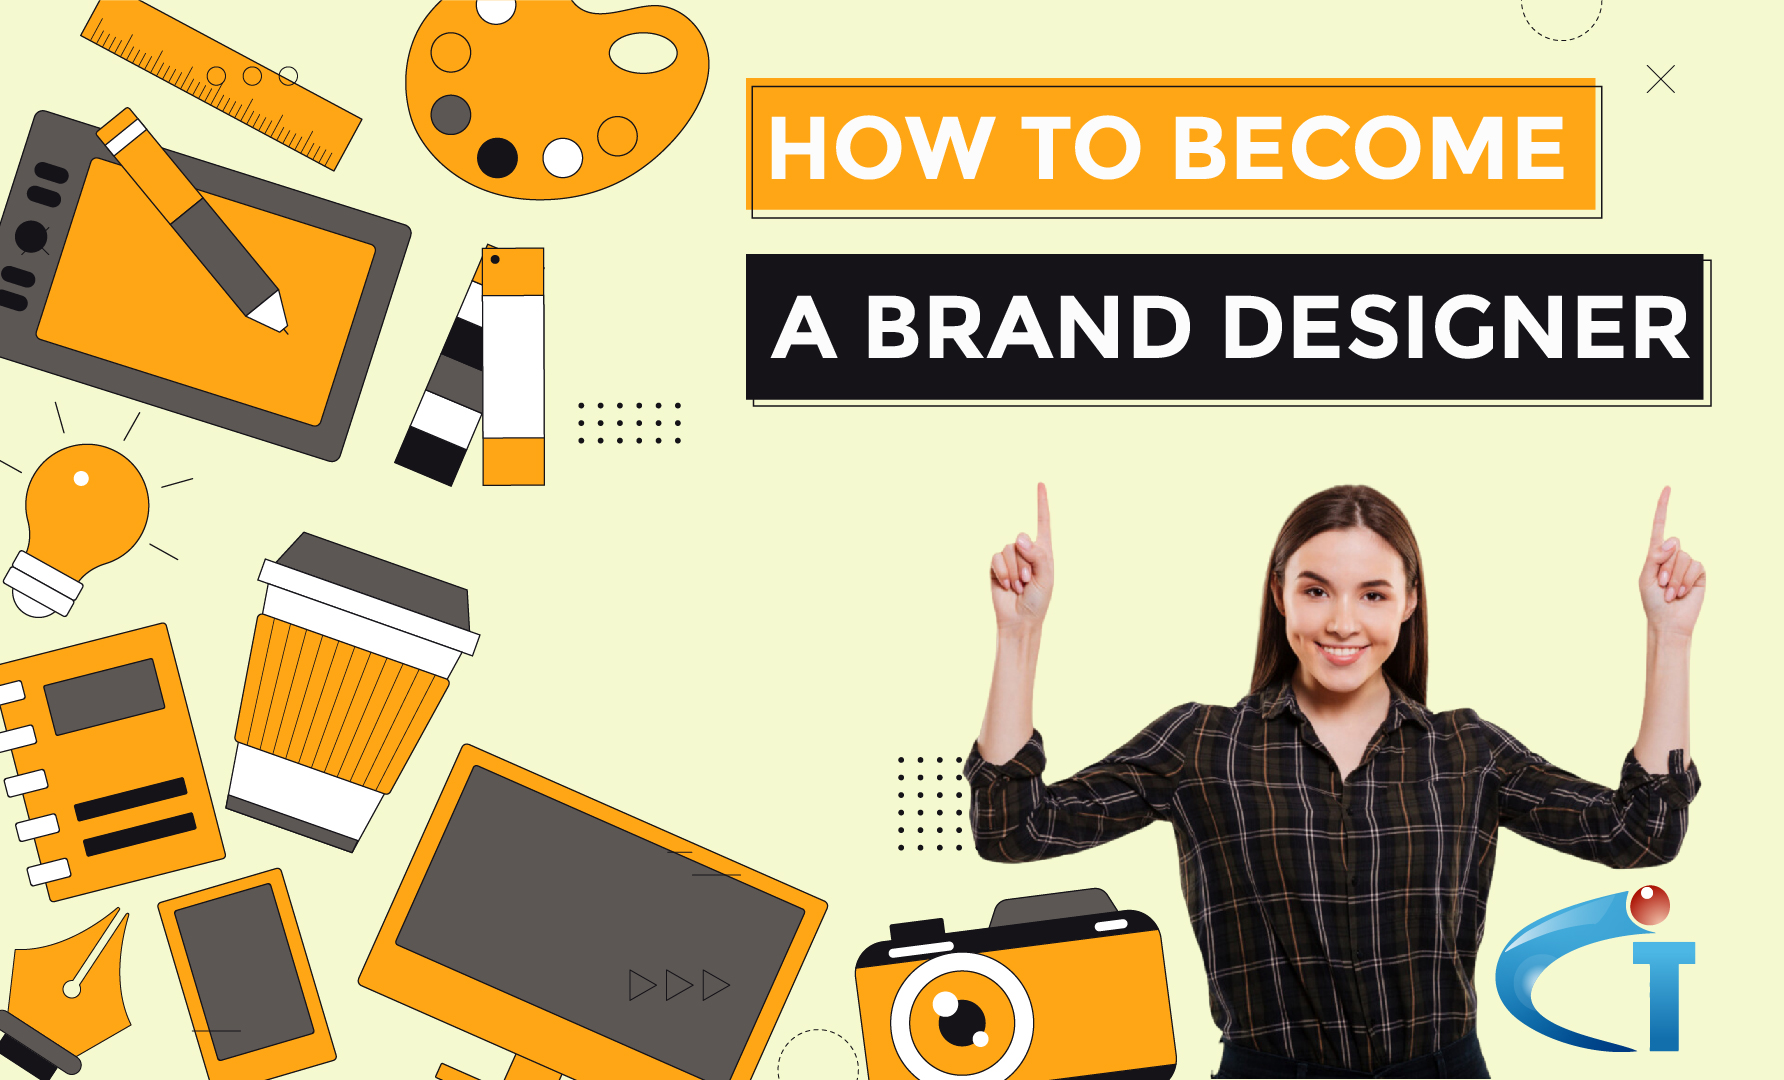 How To Become a Brand Designer in 5 Easy Steps